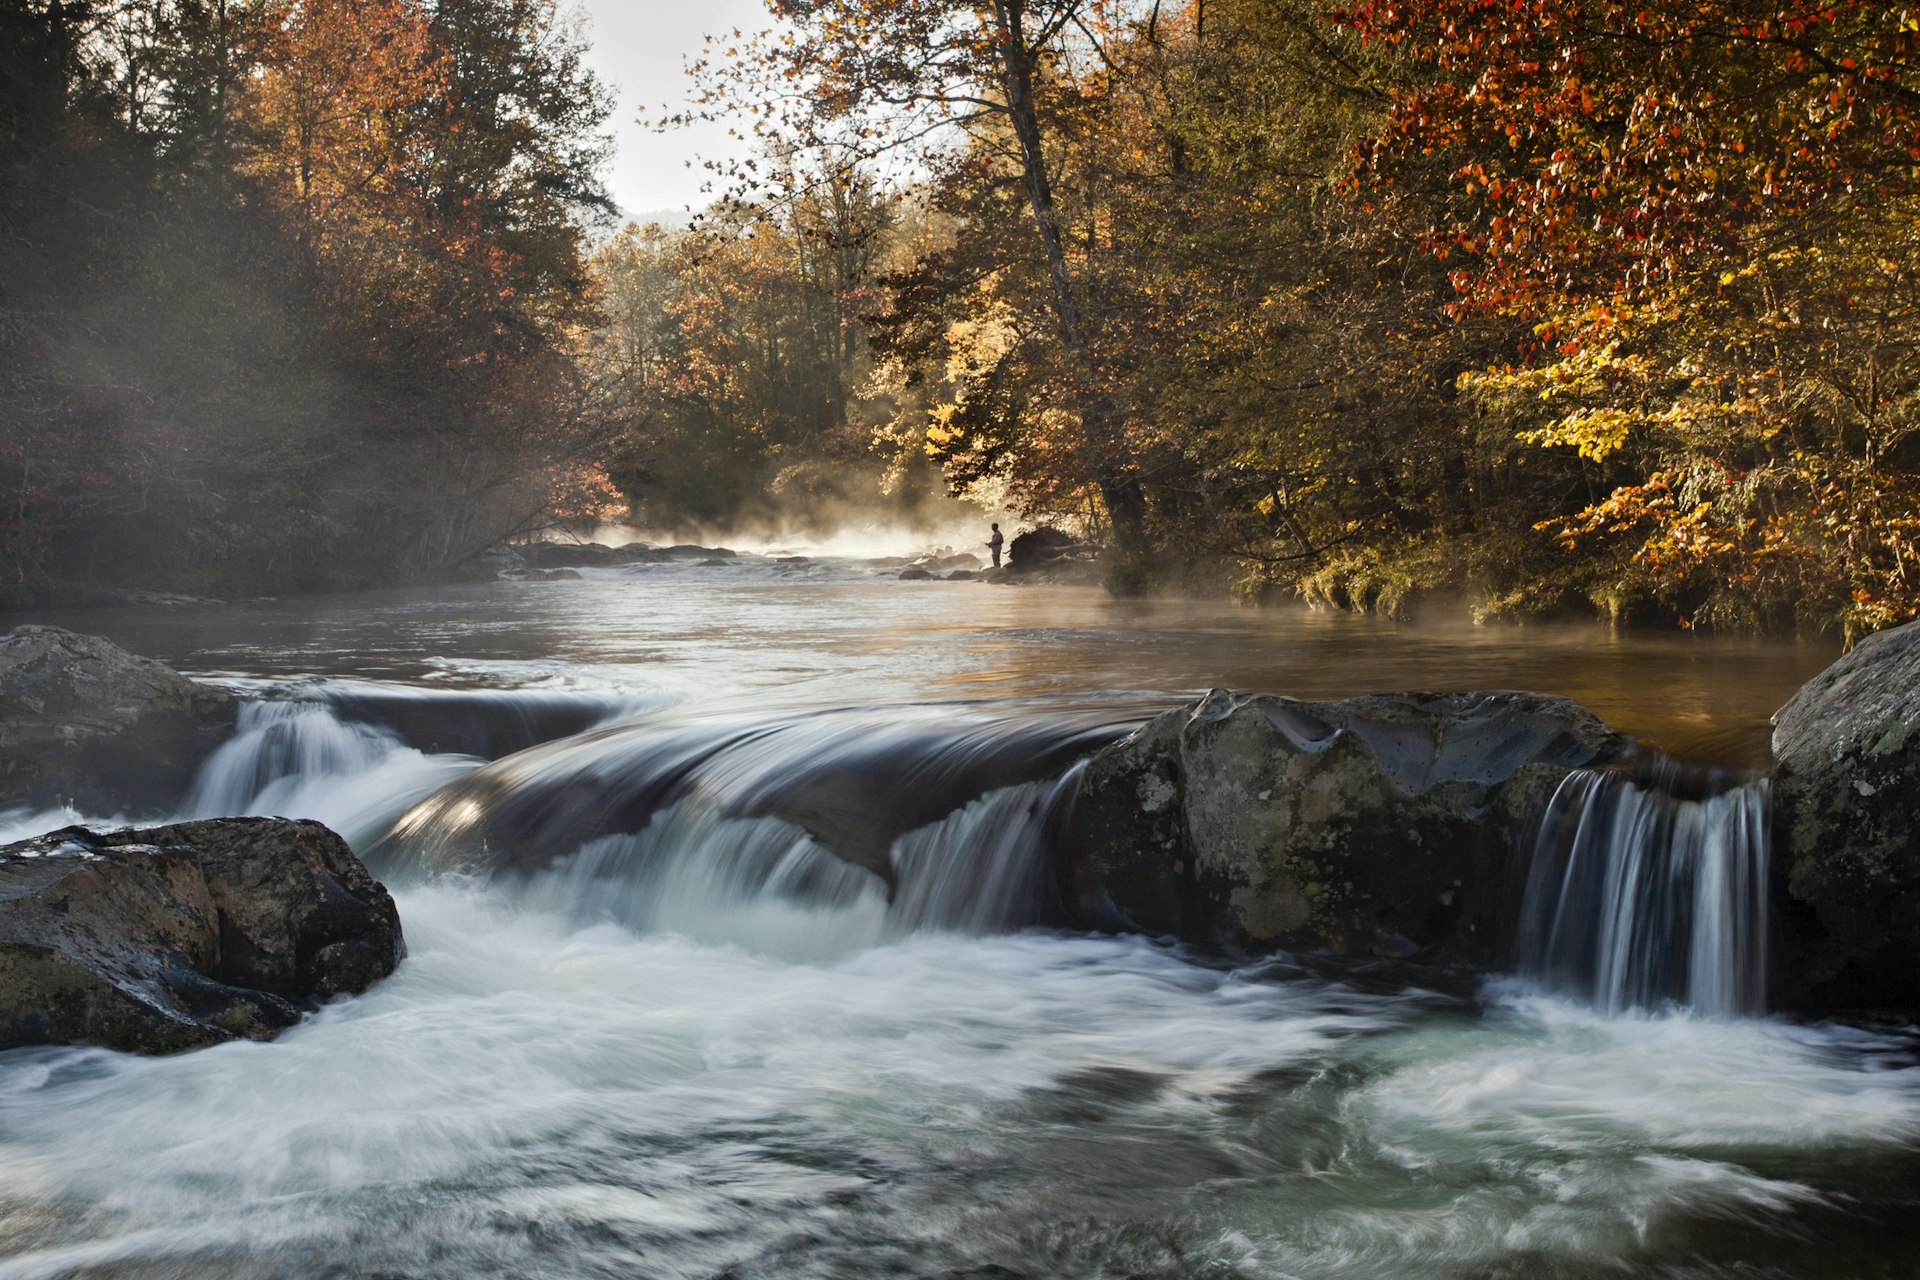 A fisherman stands in the background of an autumn scene with mist still floating on the river and water flowing over rocks in the foreground